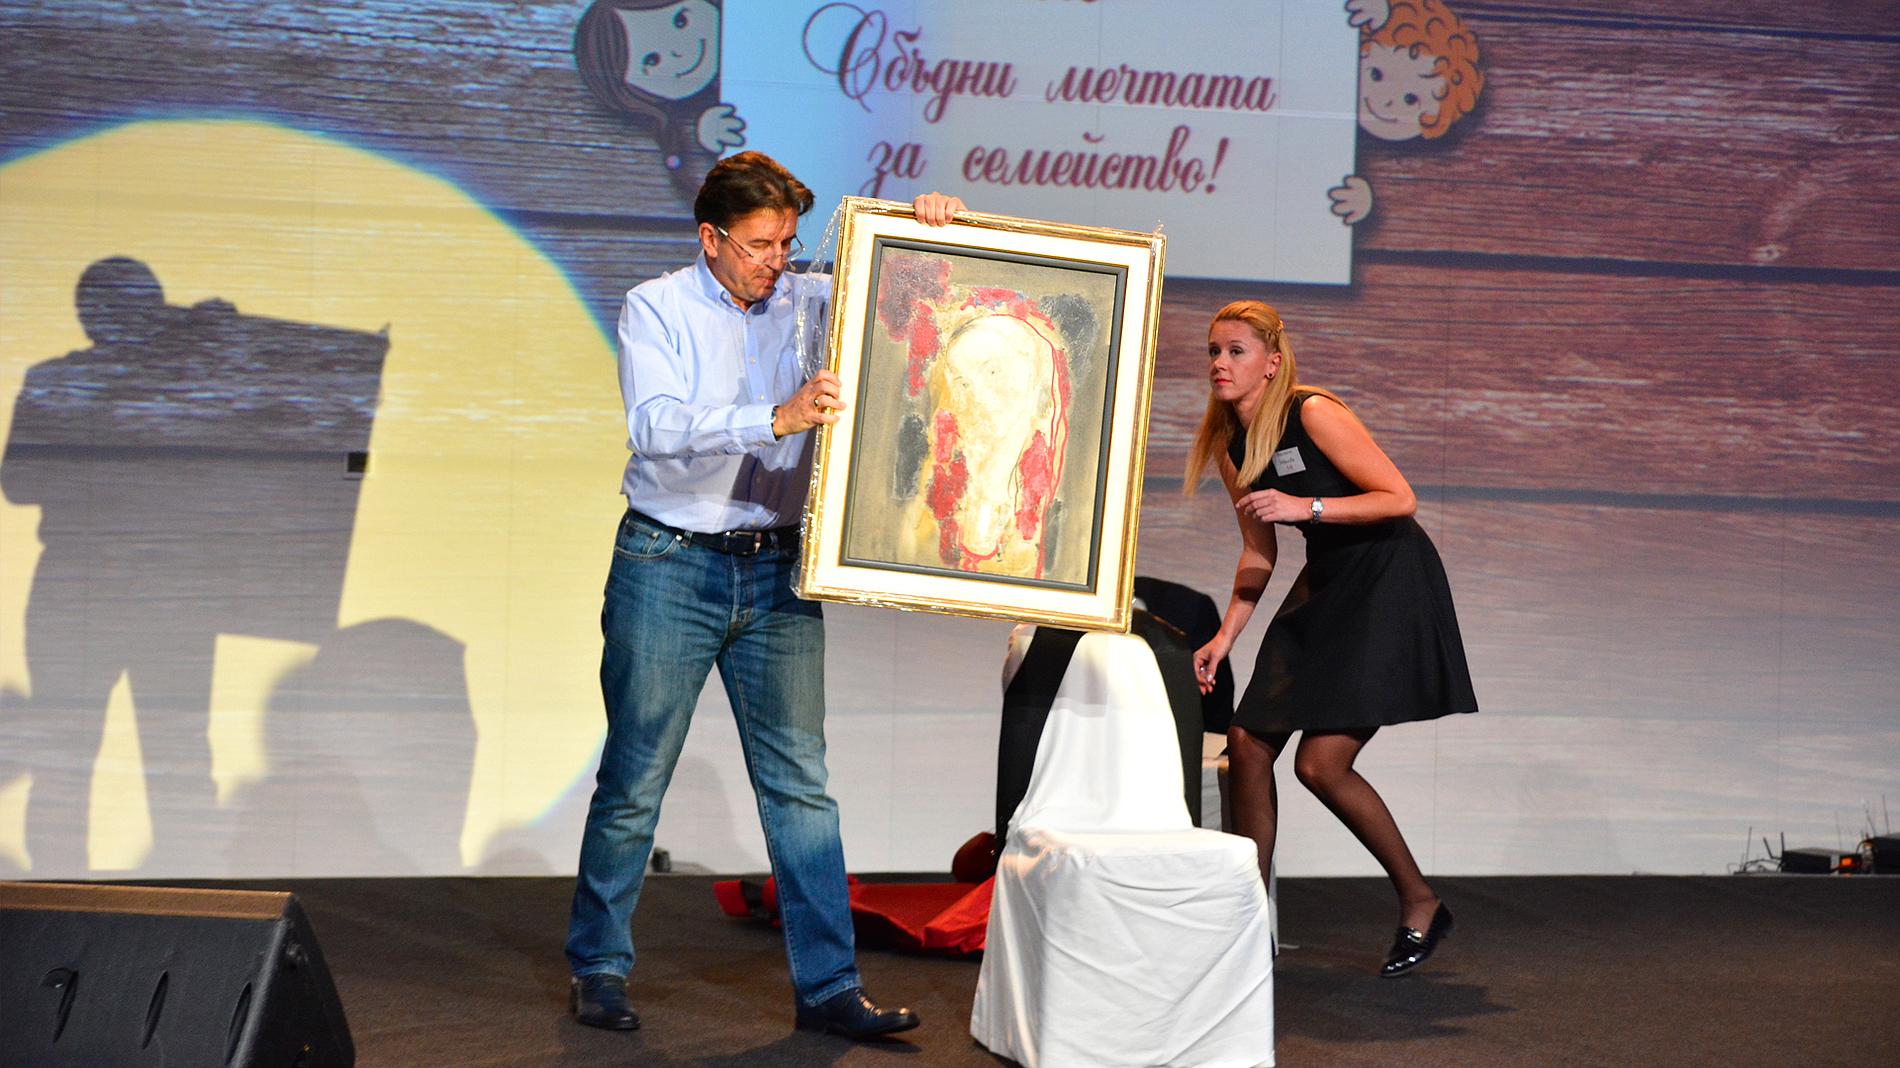 “Evening of Virtues” auction